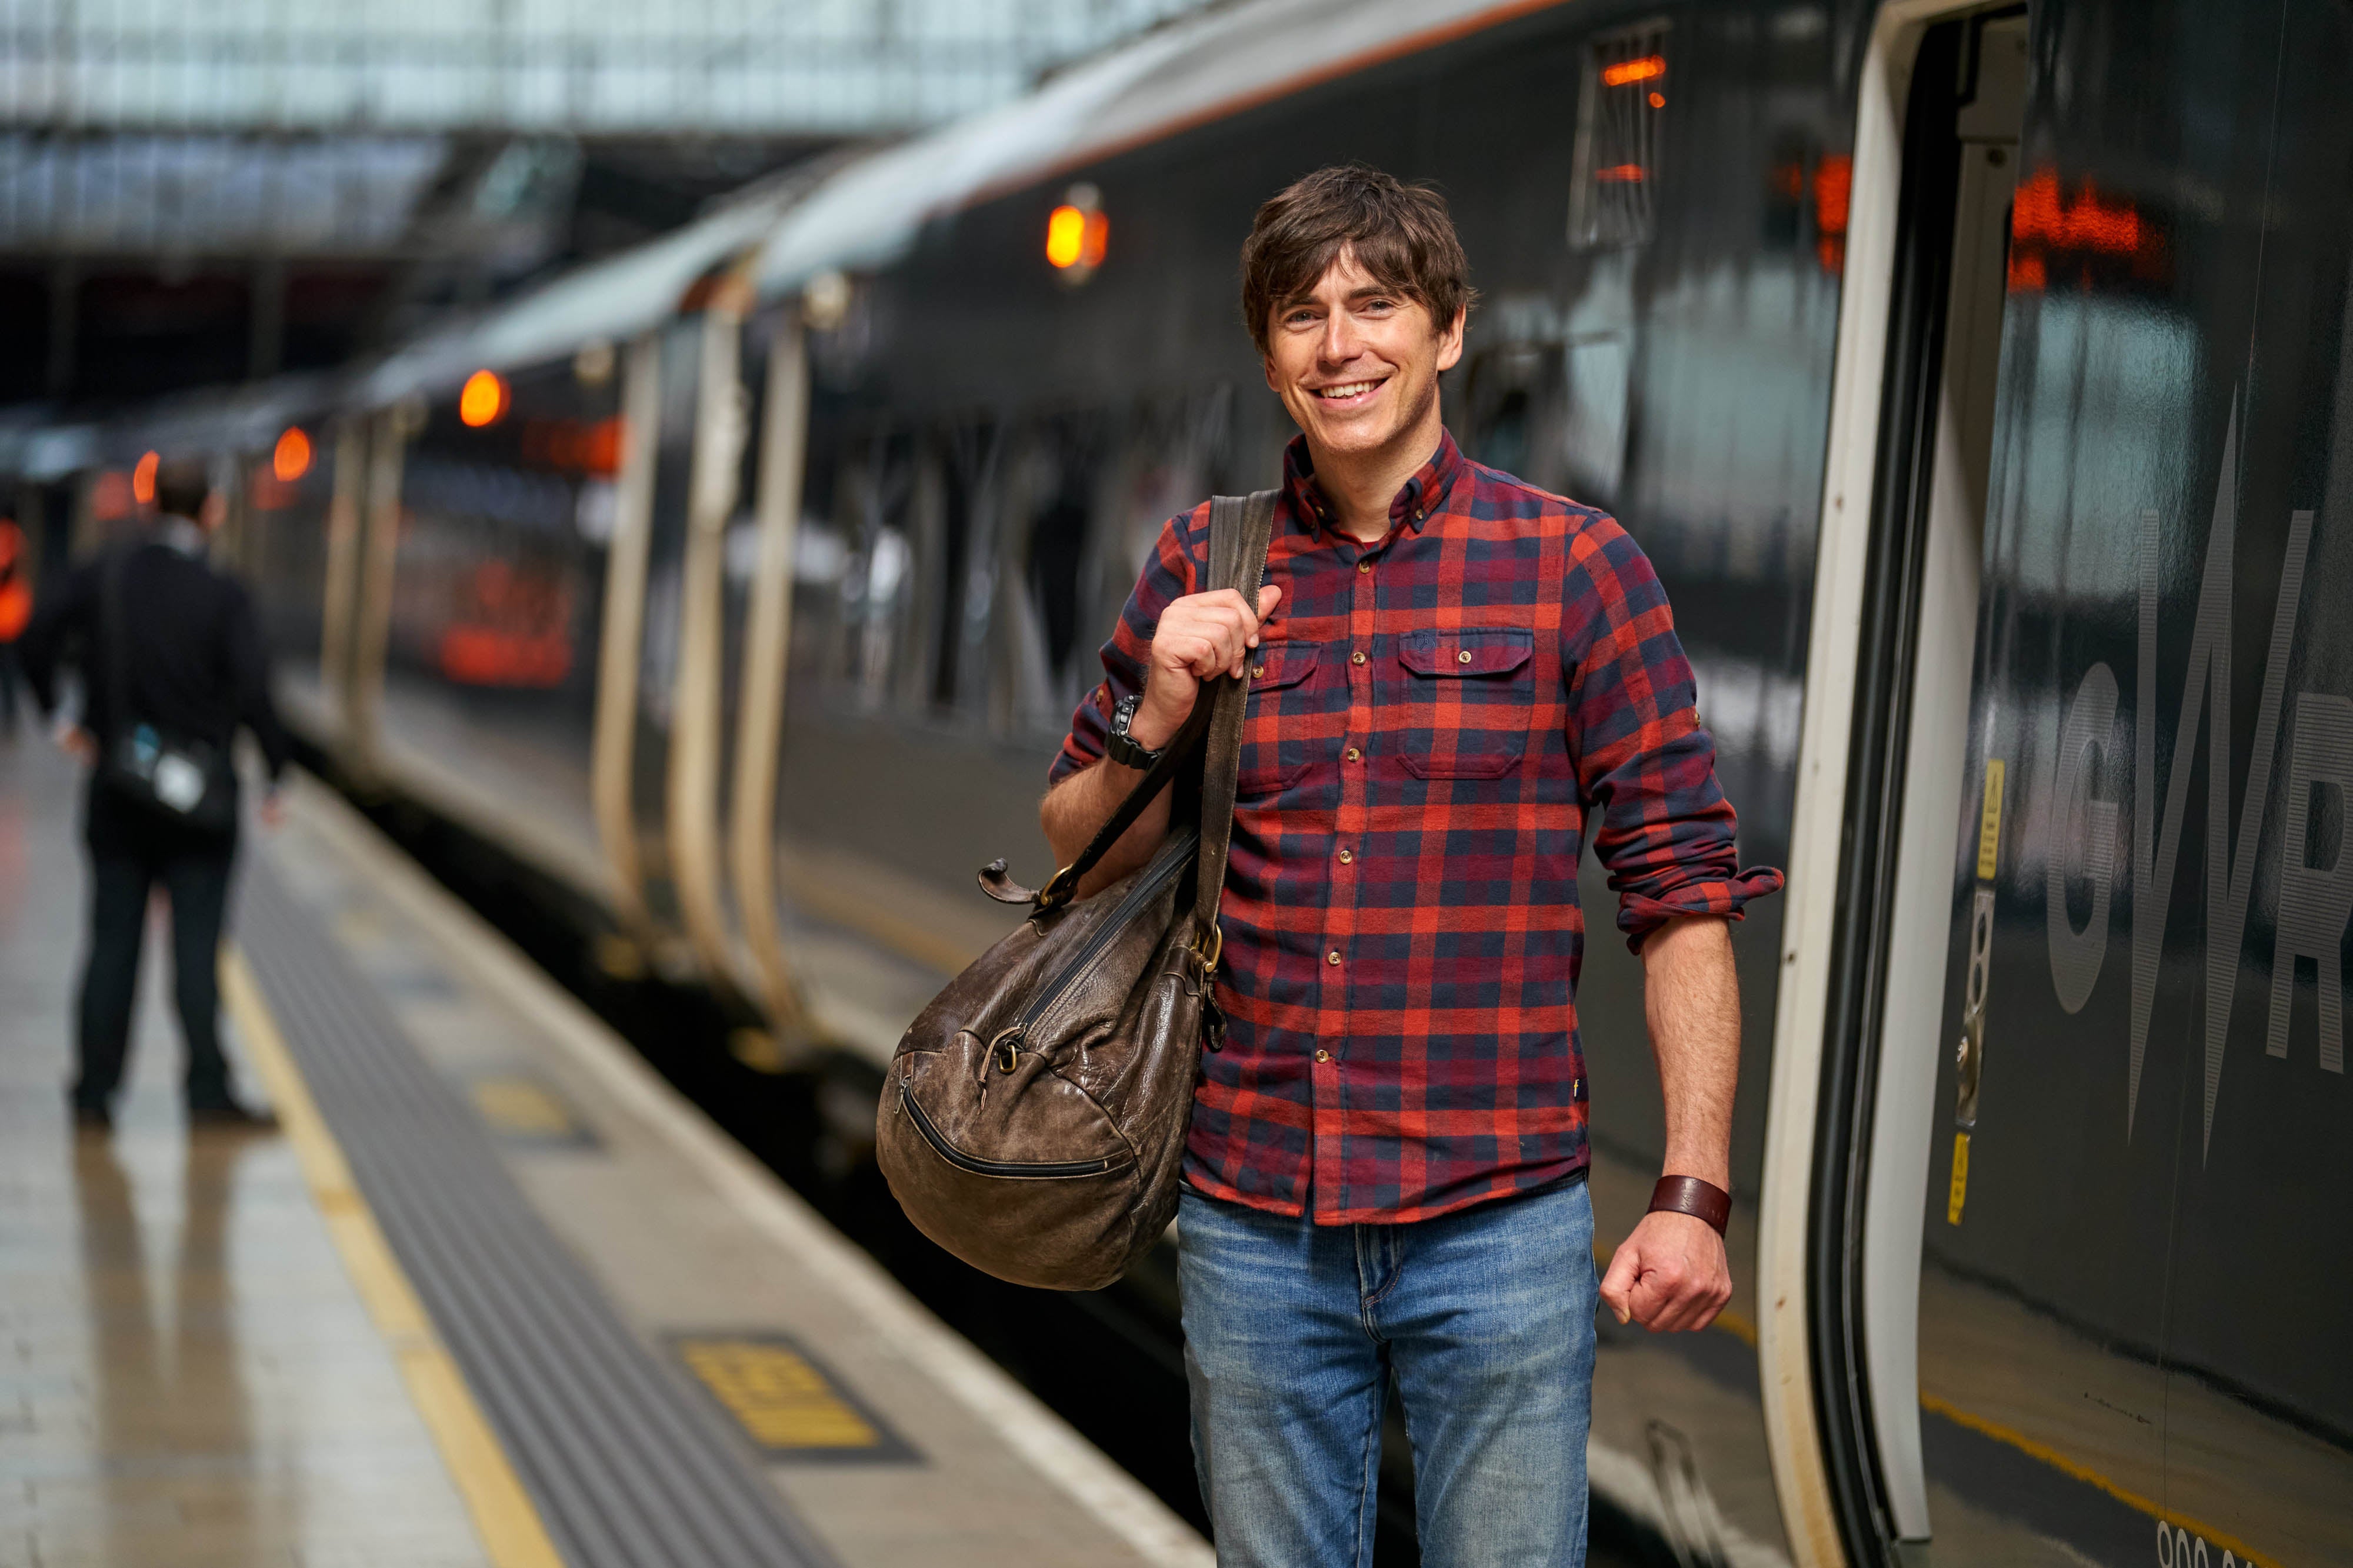 Travel presenter Simon Reeve is backing the campaign